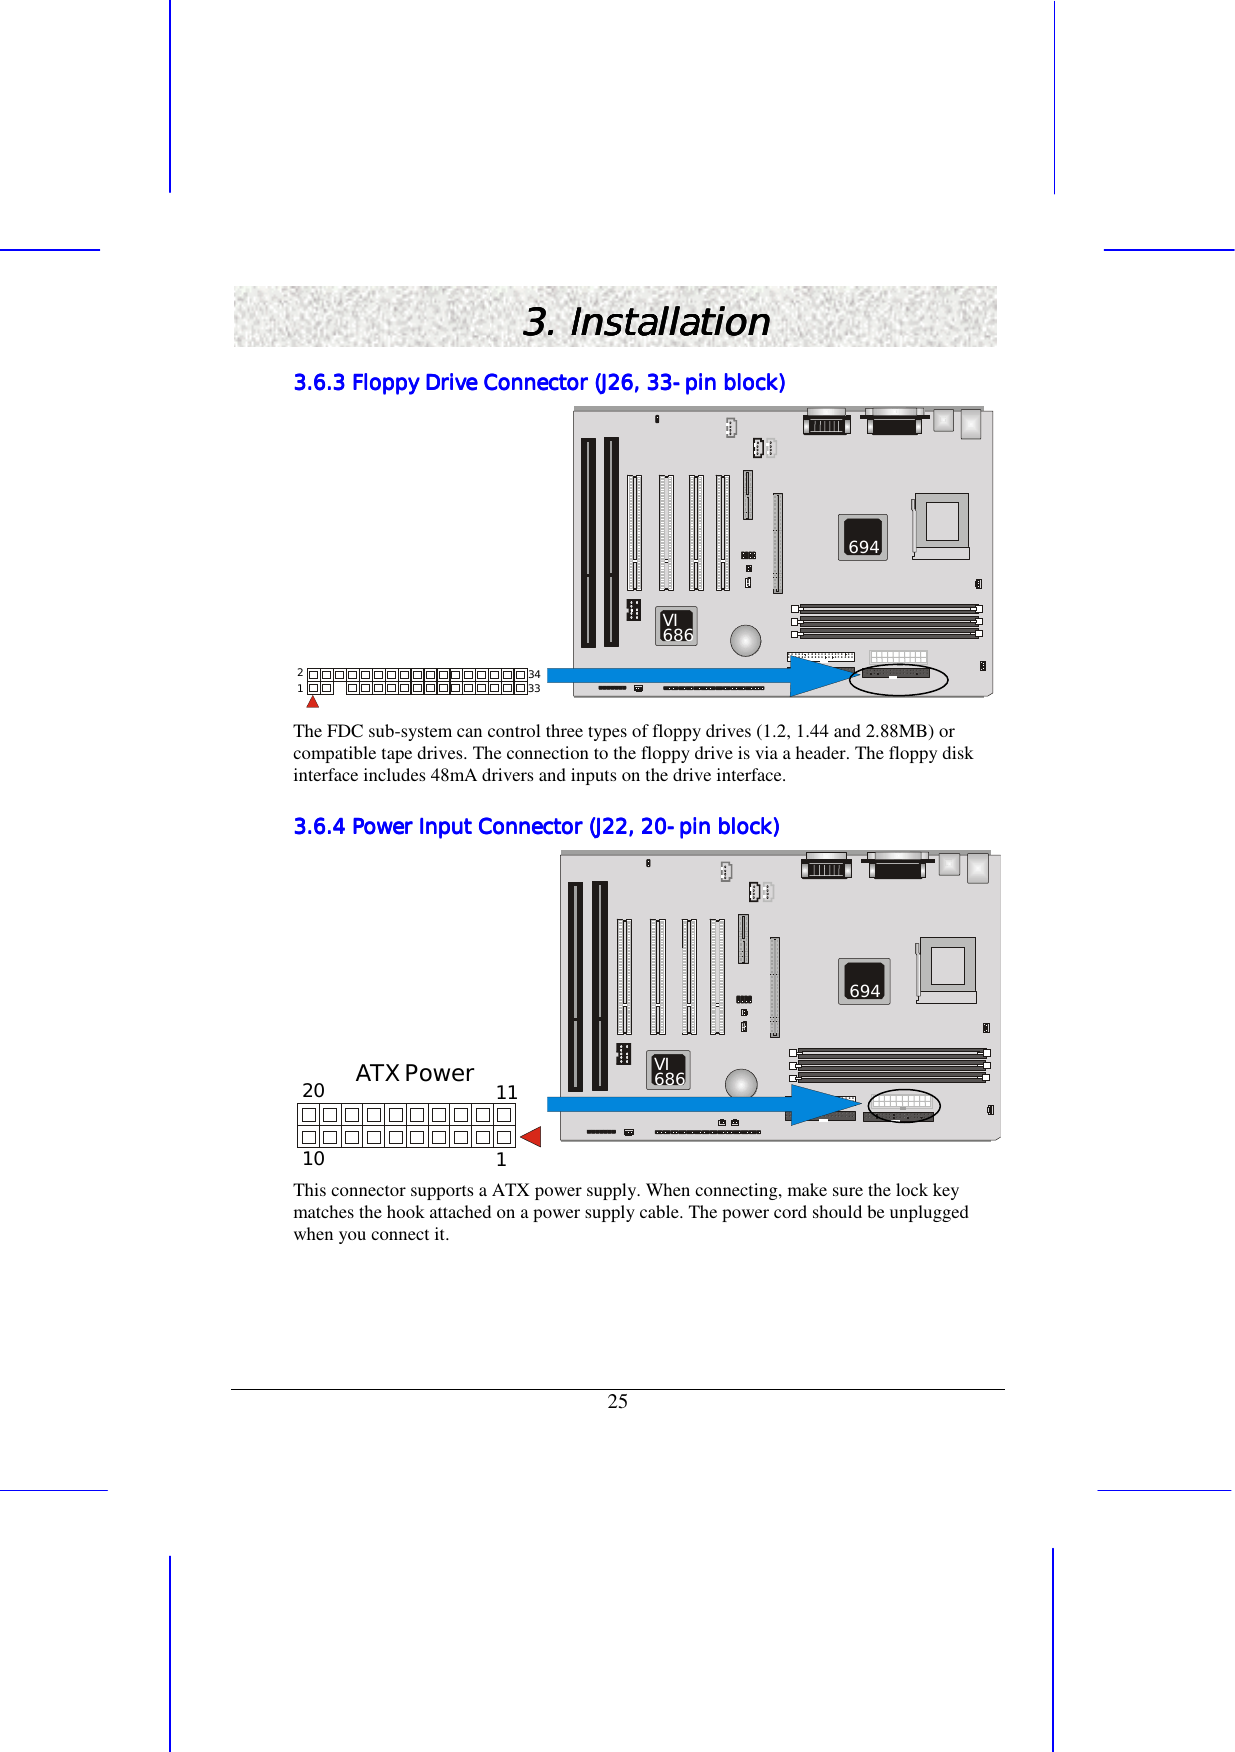   25 3. Installation3. Installation3. Installation3. Installation    3.6.3 Floppy Drive Connector (J26, 333.6.3 Floppy Drive Connector (J26, 333.6.3 Floppy Drive Connector (J26, 333.6.3 Floppy Drive Connector (J26, 33----pin block)pin block)pin block)pin block)            343321  VI686 694 The FDC sub-system can control three types of floppy drives (1.2, 1.44 and 2.88MB) or compatible tape drives. The connection to the floppy drive is via a header. The floppy disk interface includes 48mA drivers and inputs on the drive interface. 3.6.4 Power Input Connector (J22, 203.6.4 Power Input Connector (J22, 203.6.4 Power Input Connector (J22, 203.6.4 Power Input Connector (J22, 20----pin block)pin block)pin block)pin block)          1112010ATX Power  VI686 694 This connector supports a ATX power supply. When connecting, make sure the lock key matches the hook attached on a power supply cable. The power cord should be unplugged when you connect it. 